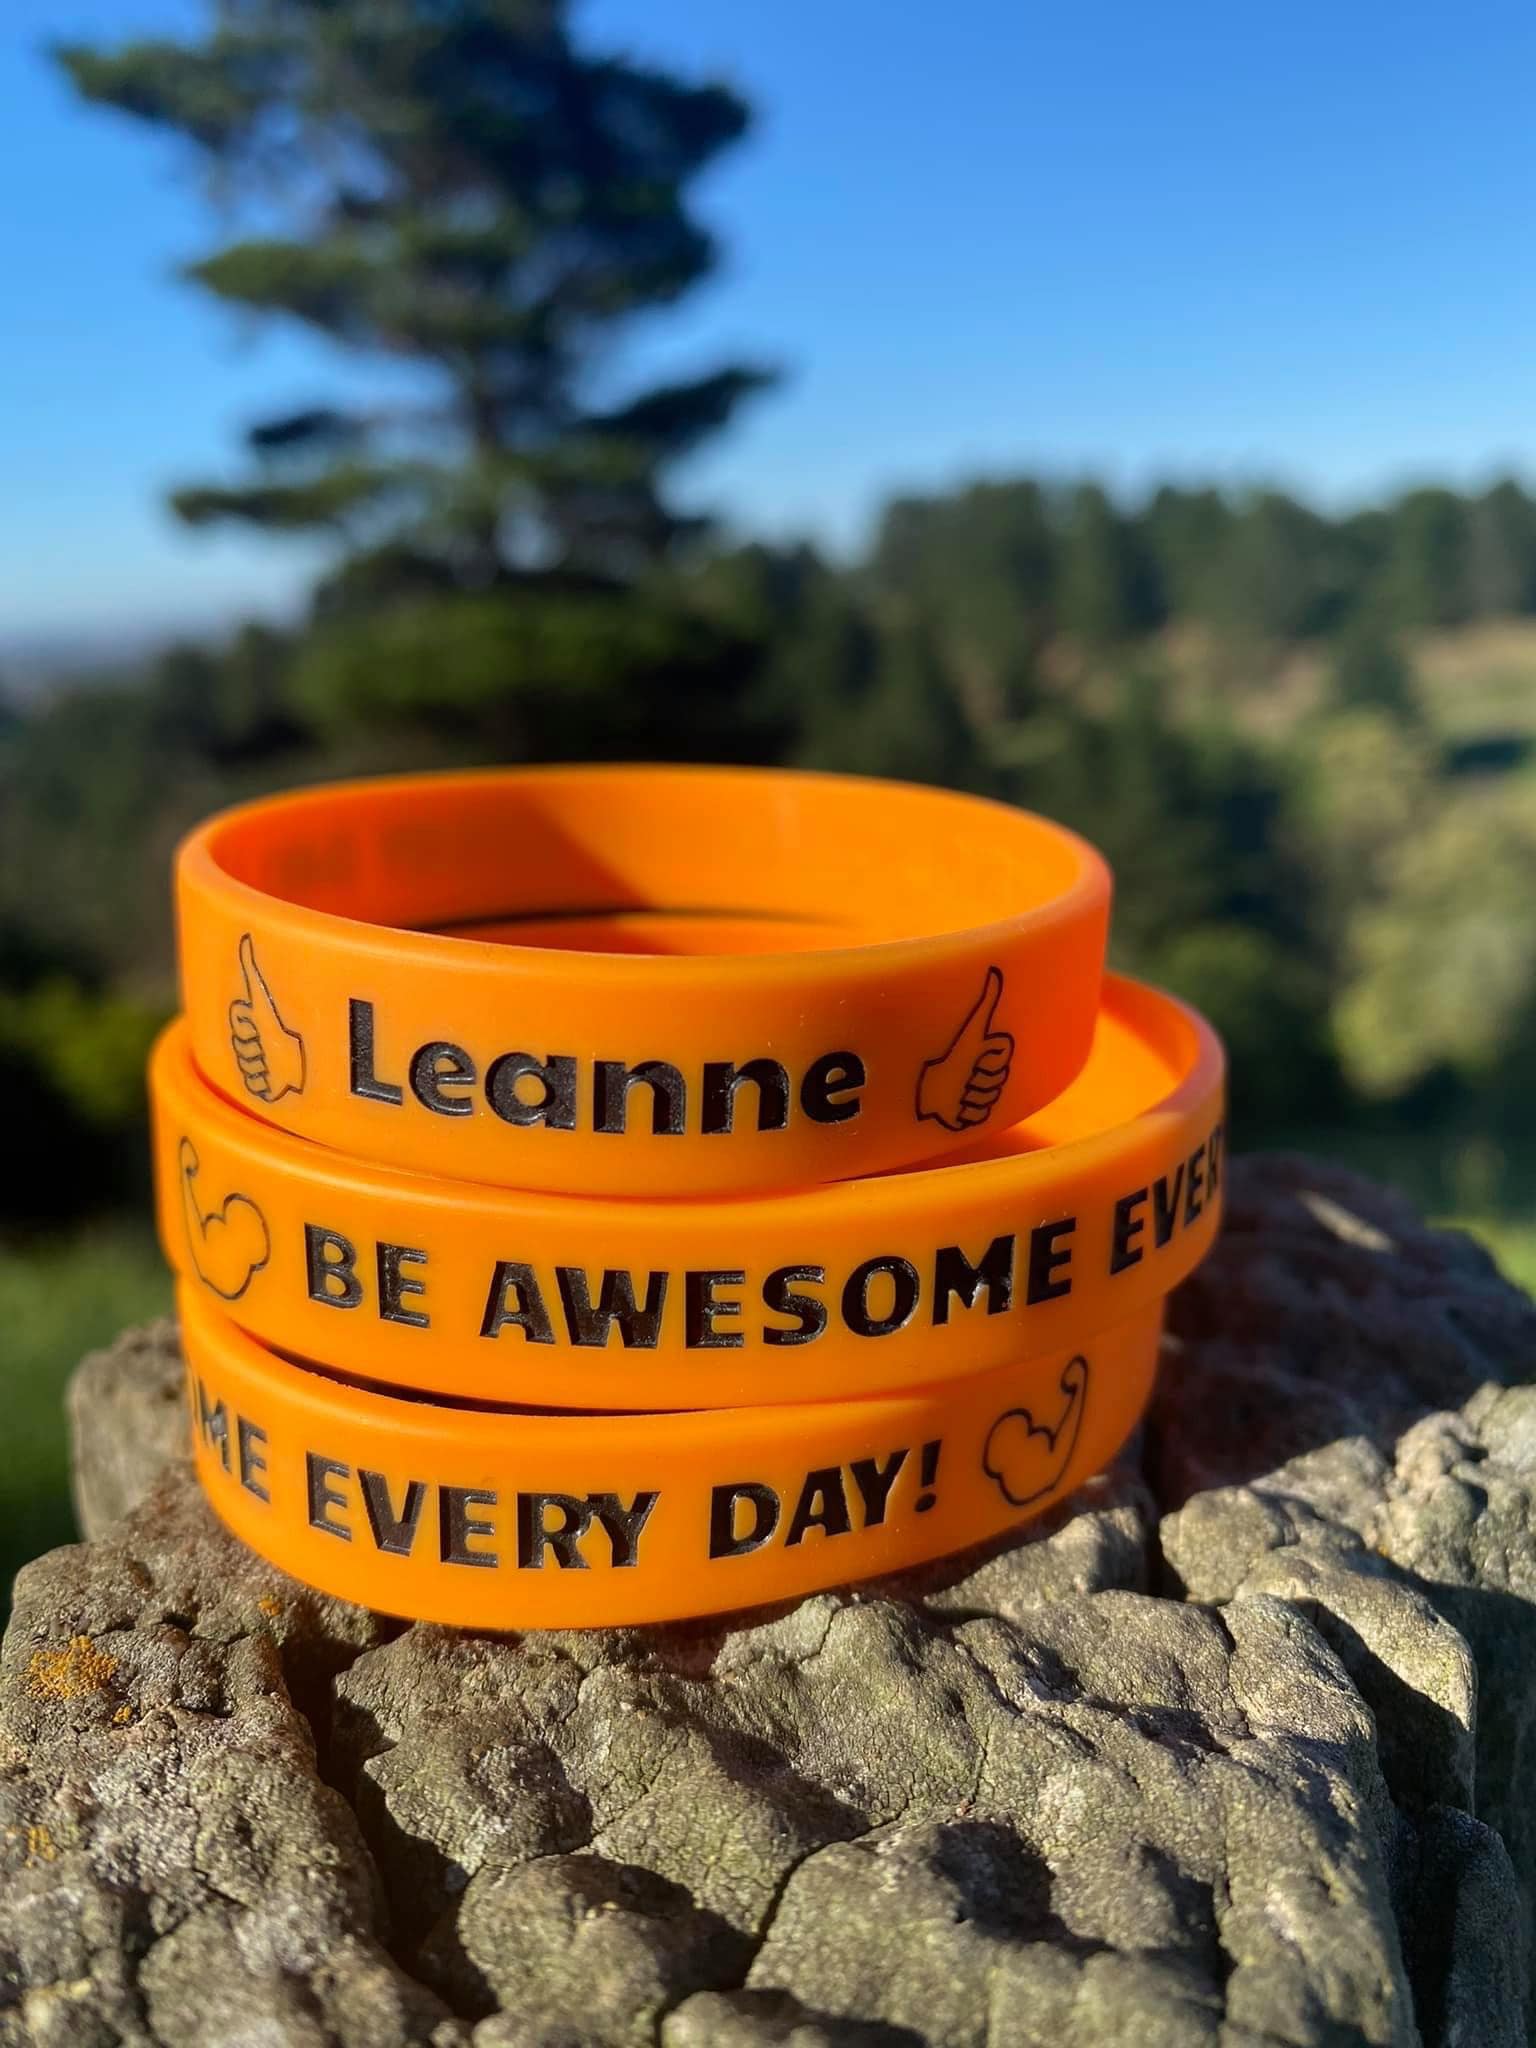 The Wristband of Inspiration!